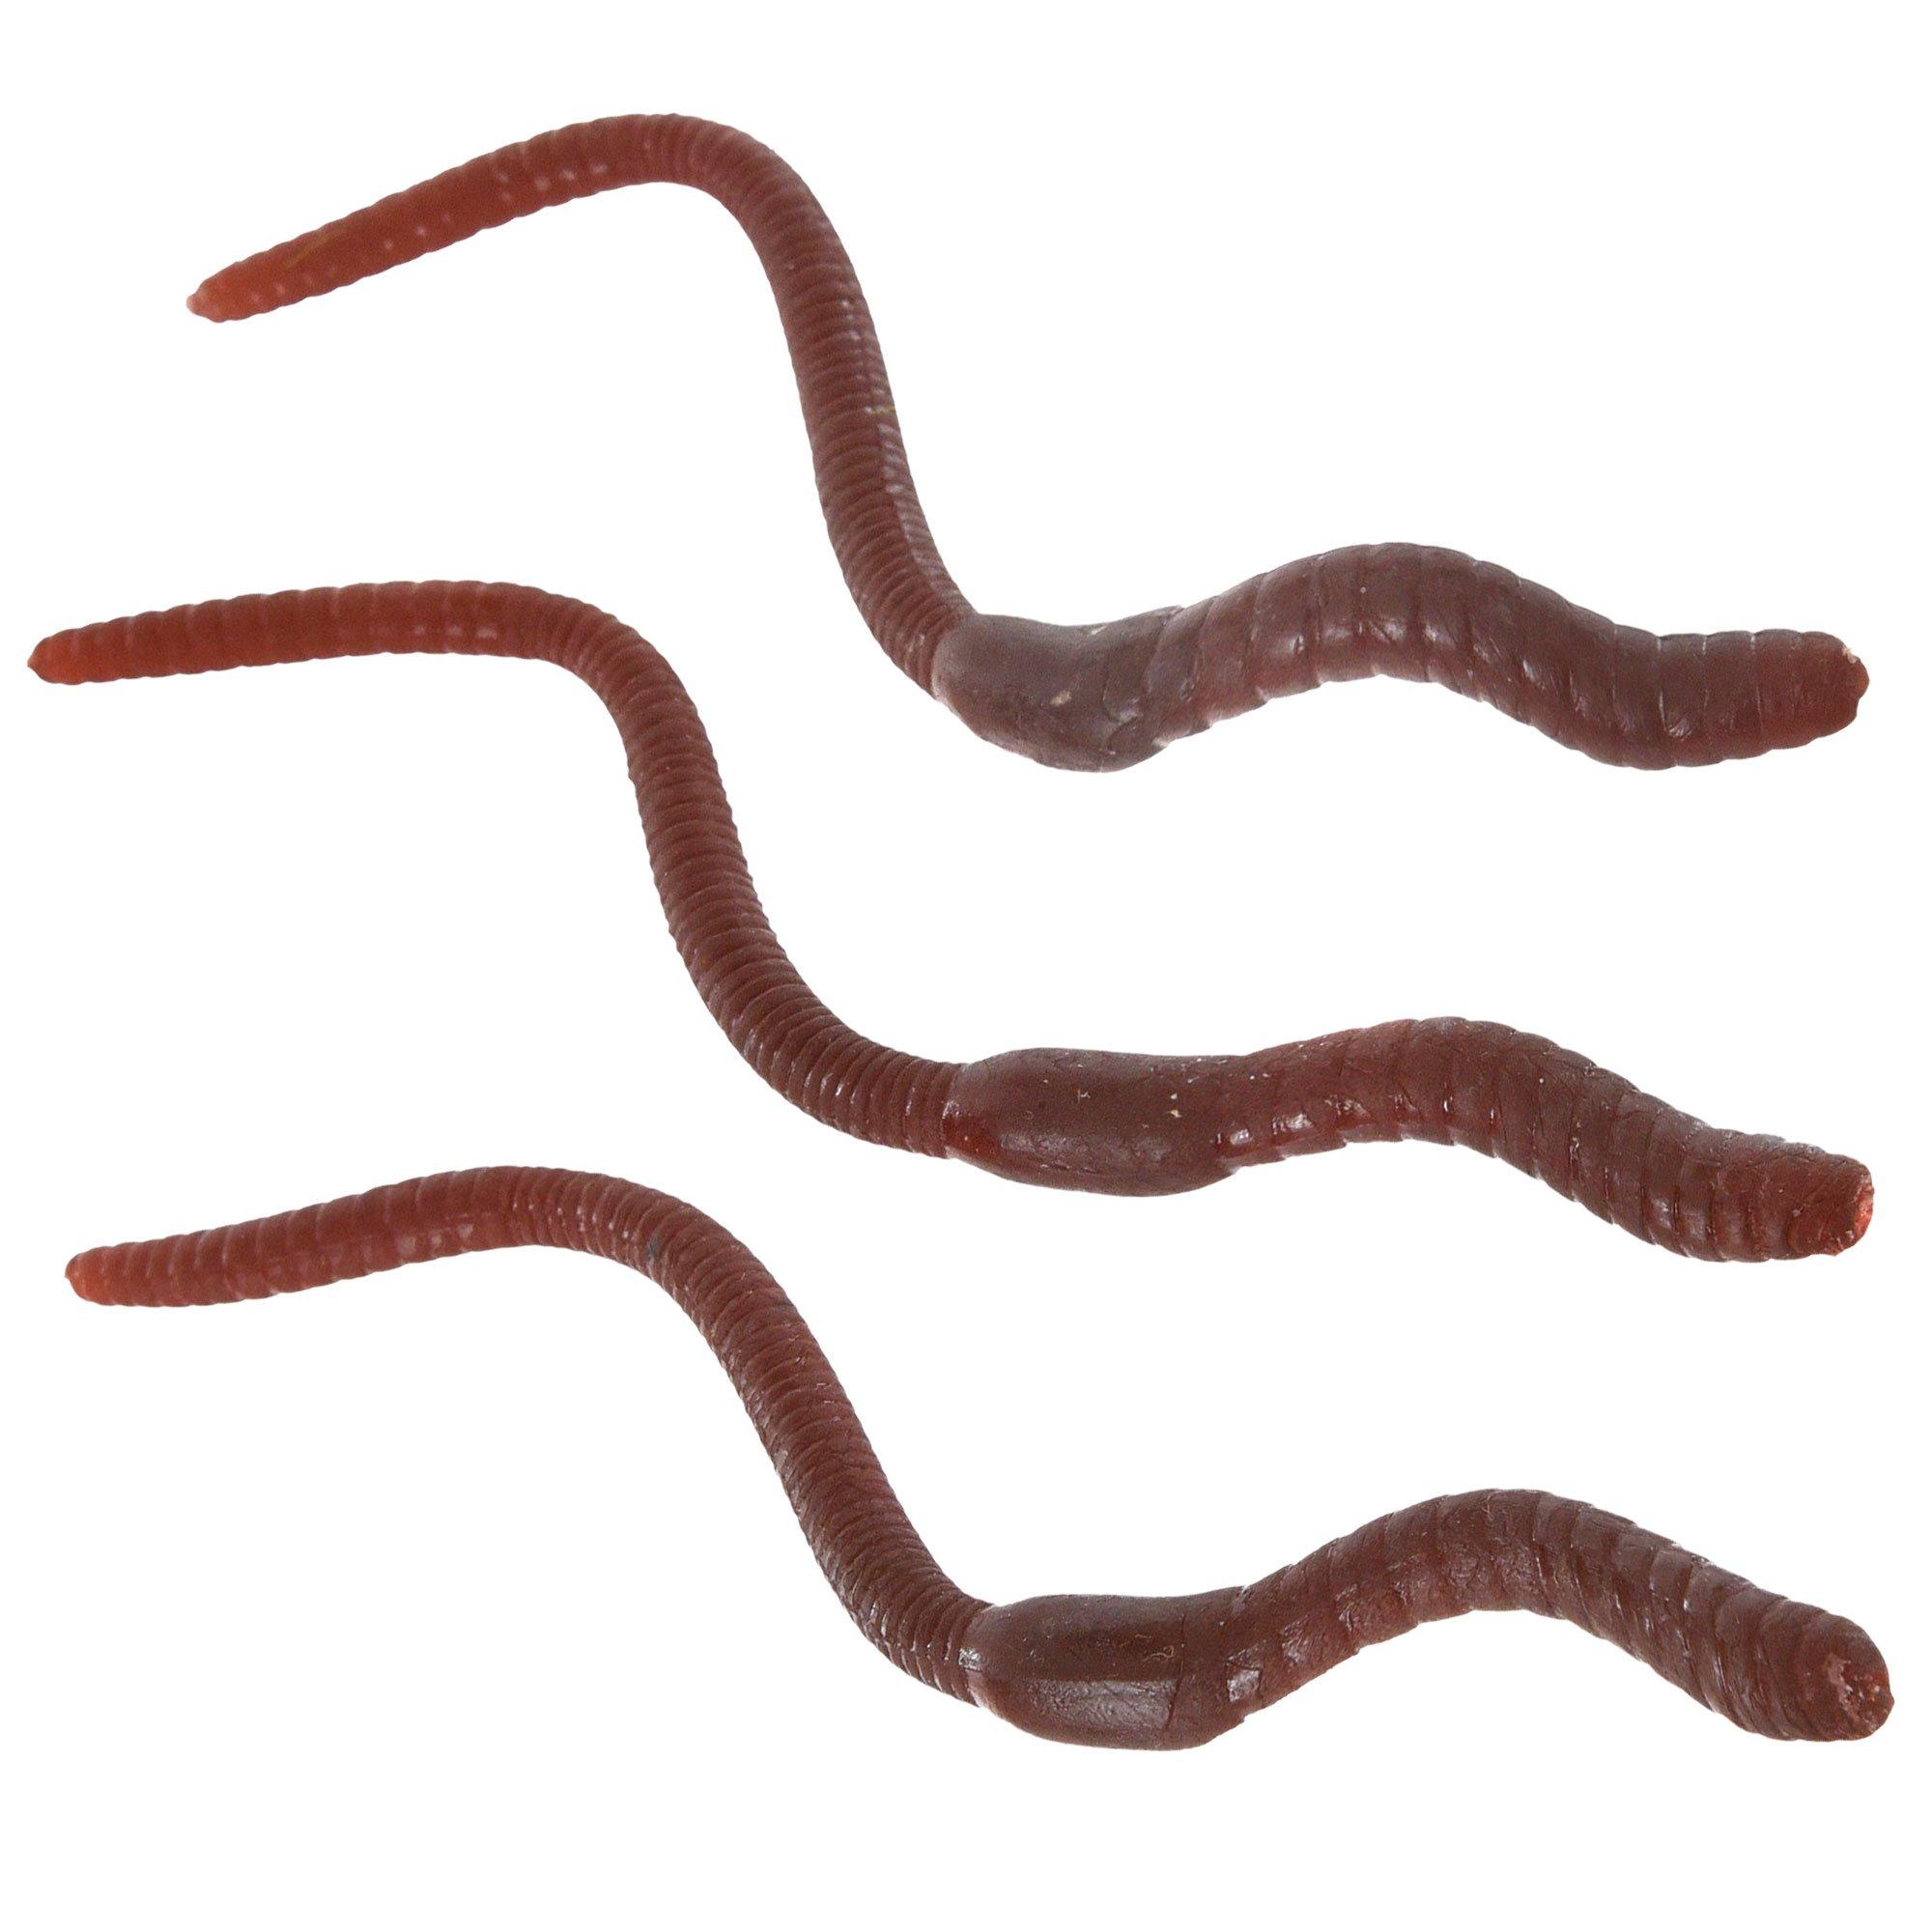 Black Plastic Worms, 5.5in, 12ct